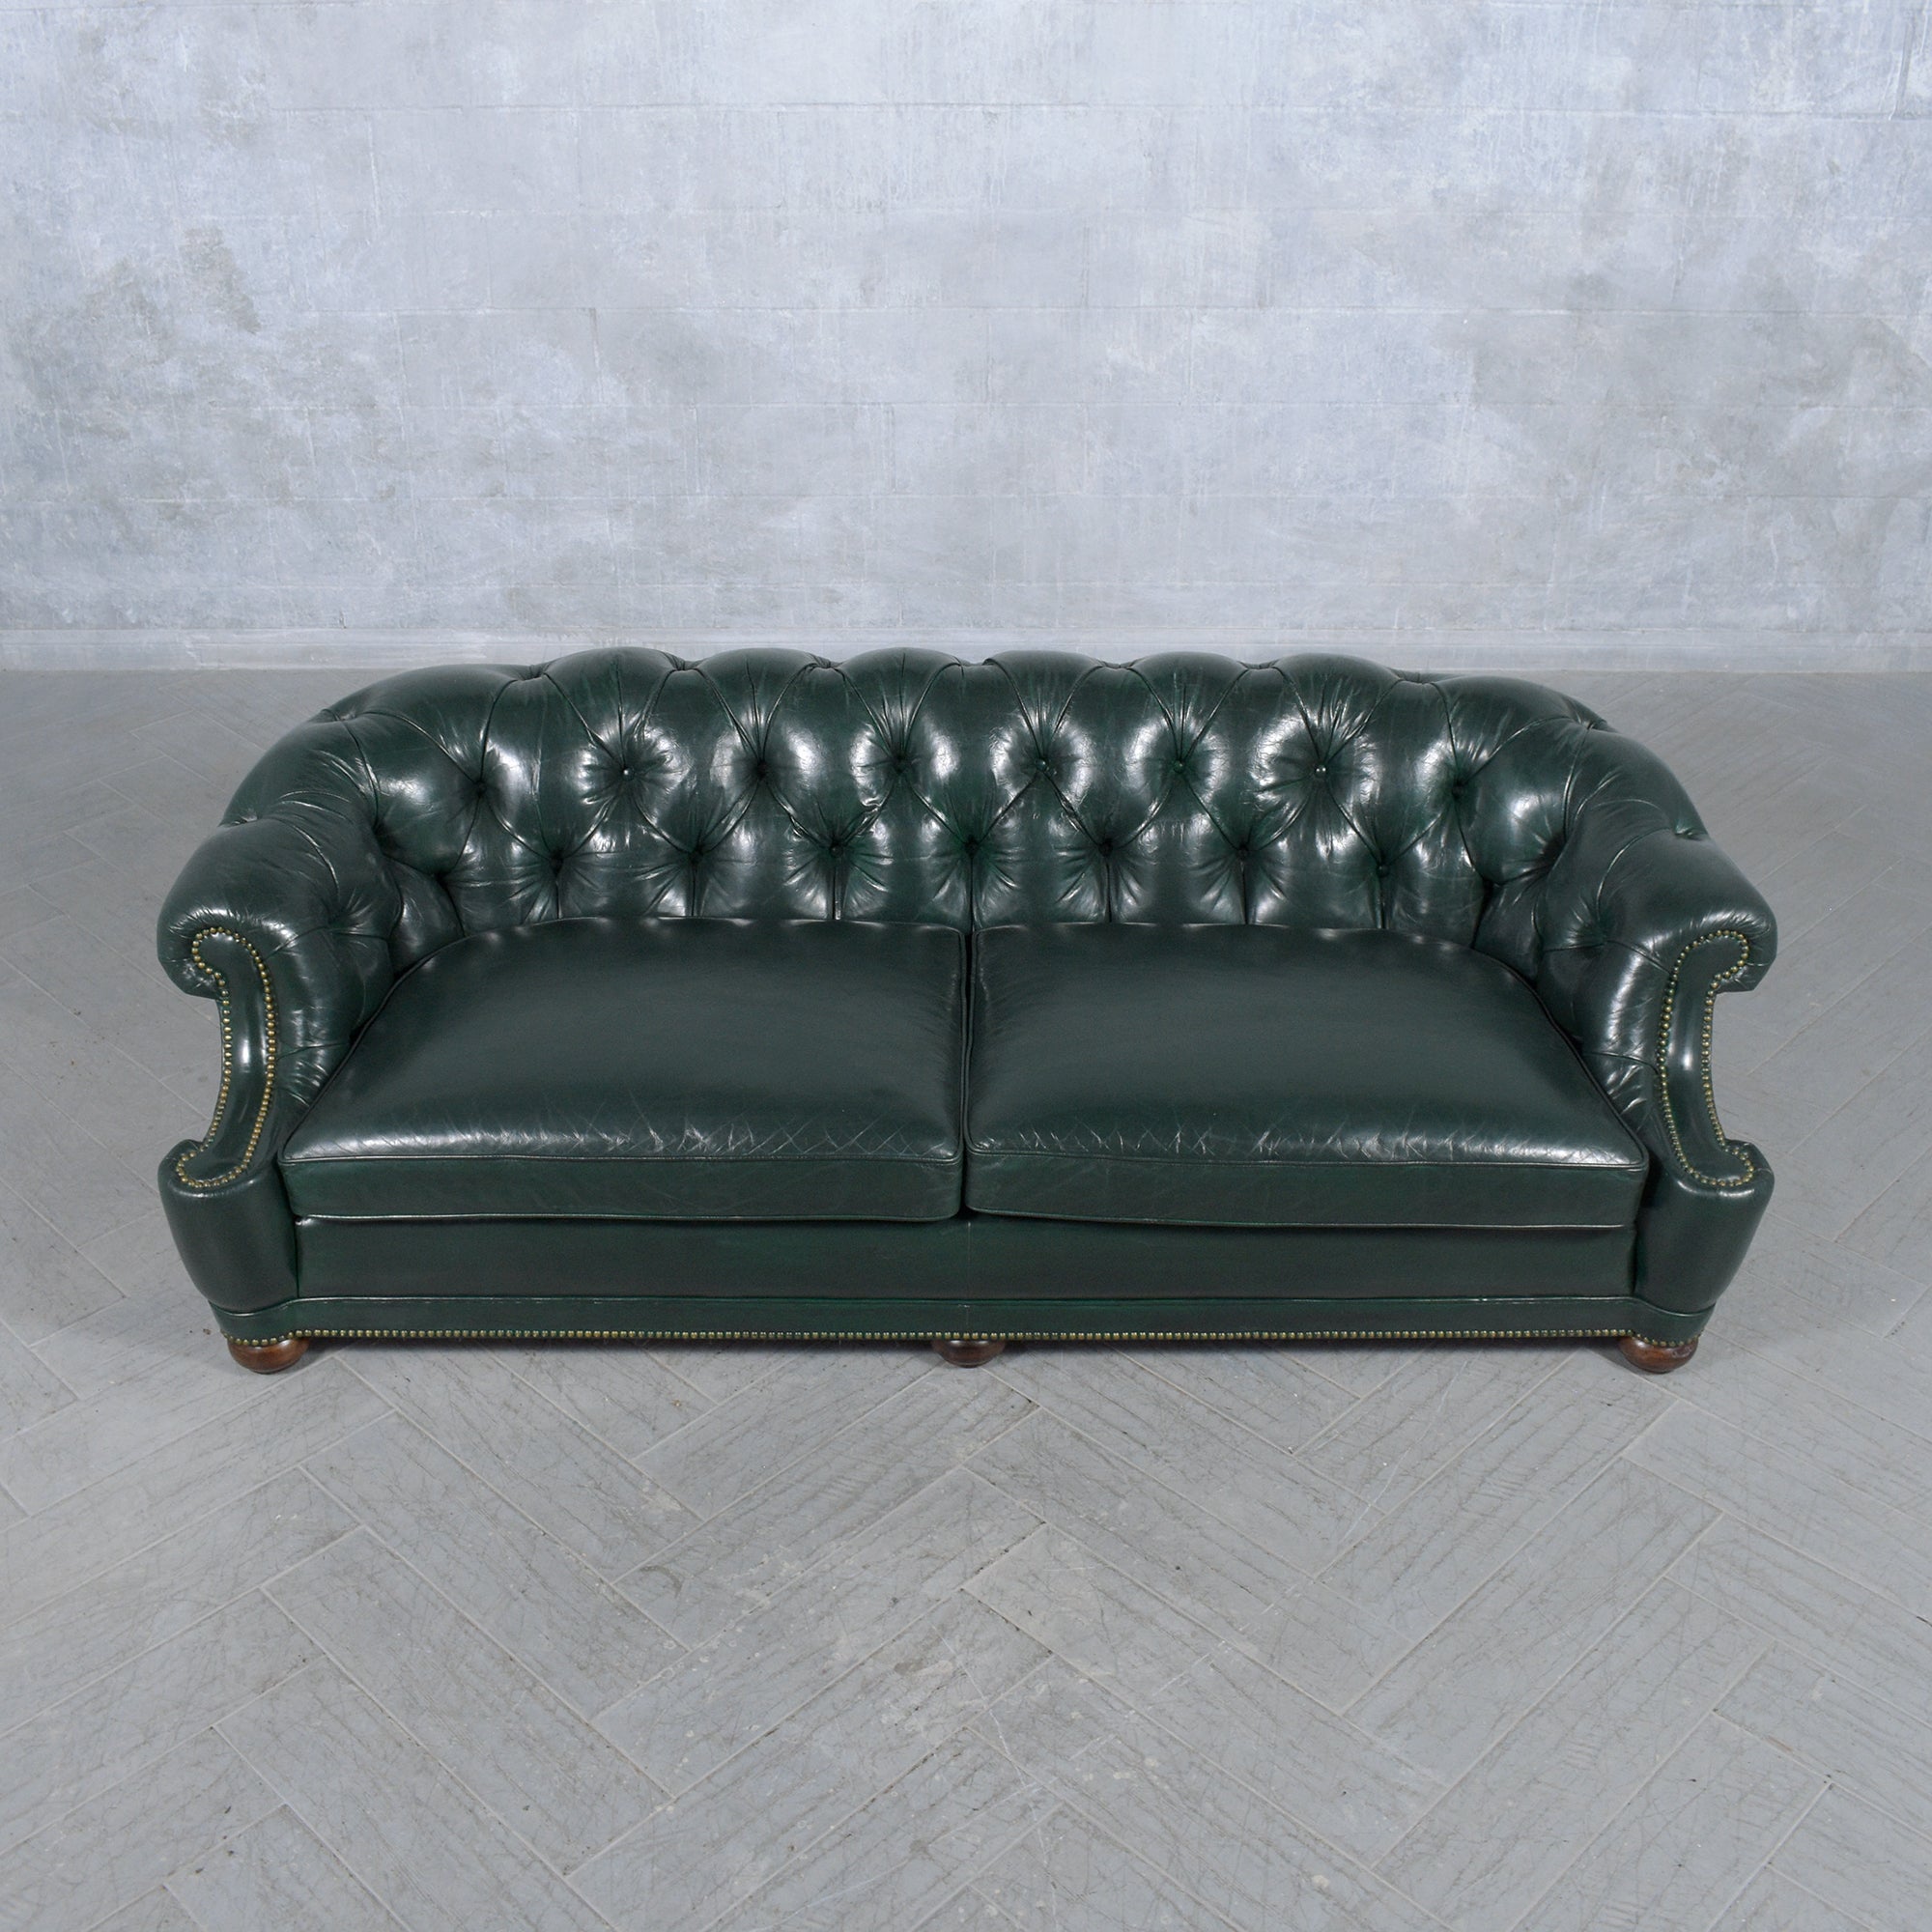 Discover the timeless luxury of our 1970s Italian Chesterfield Sofa, a vintage masterpiece revitalized for the modern era. Our skilled craftsmen have meticulously restored this sofa, blending its classic allure with contemporary style. Made from